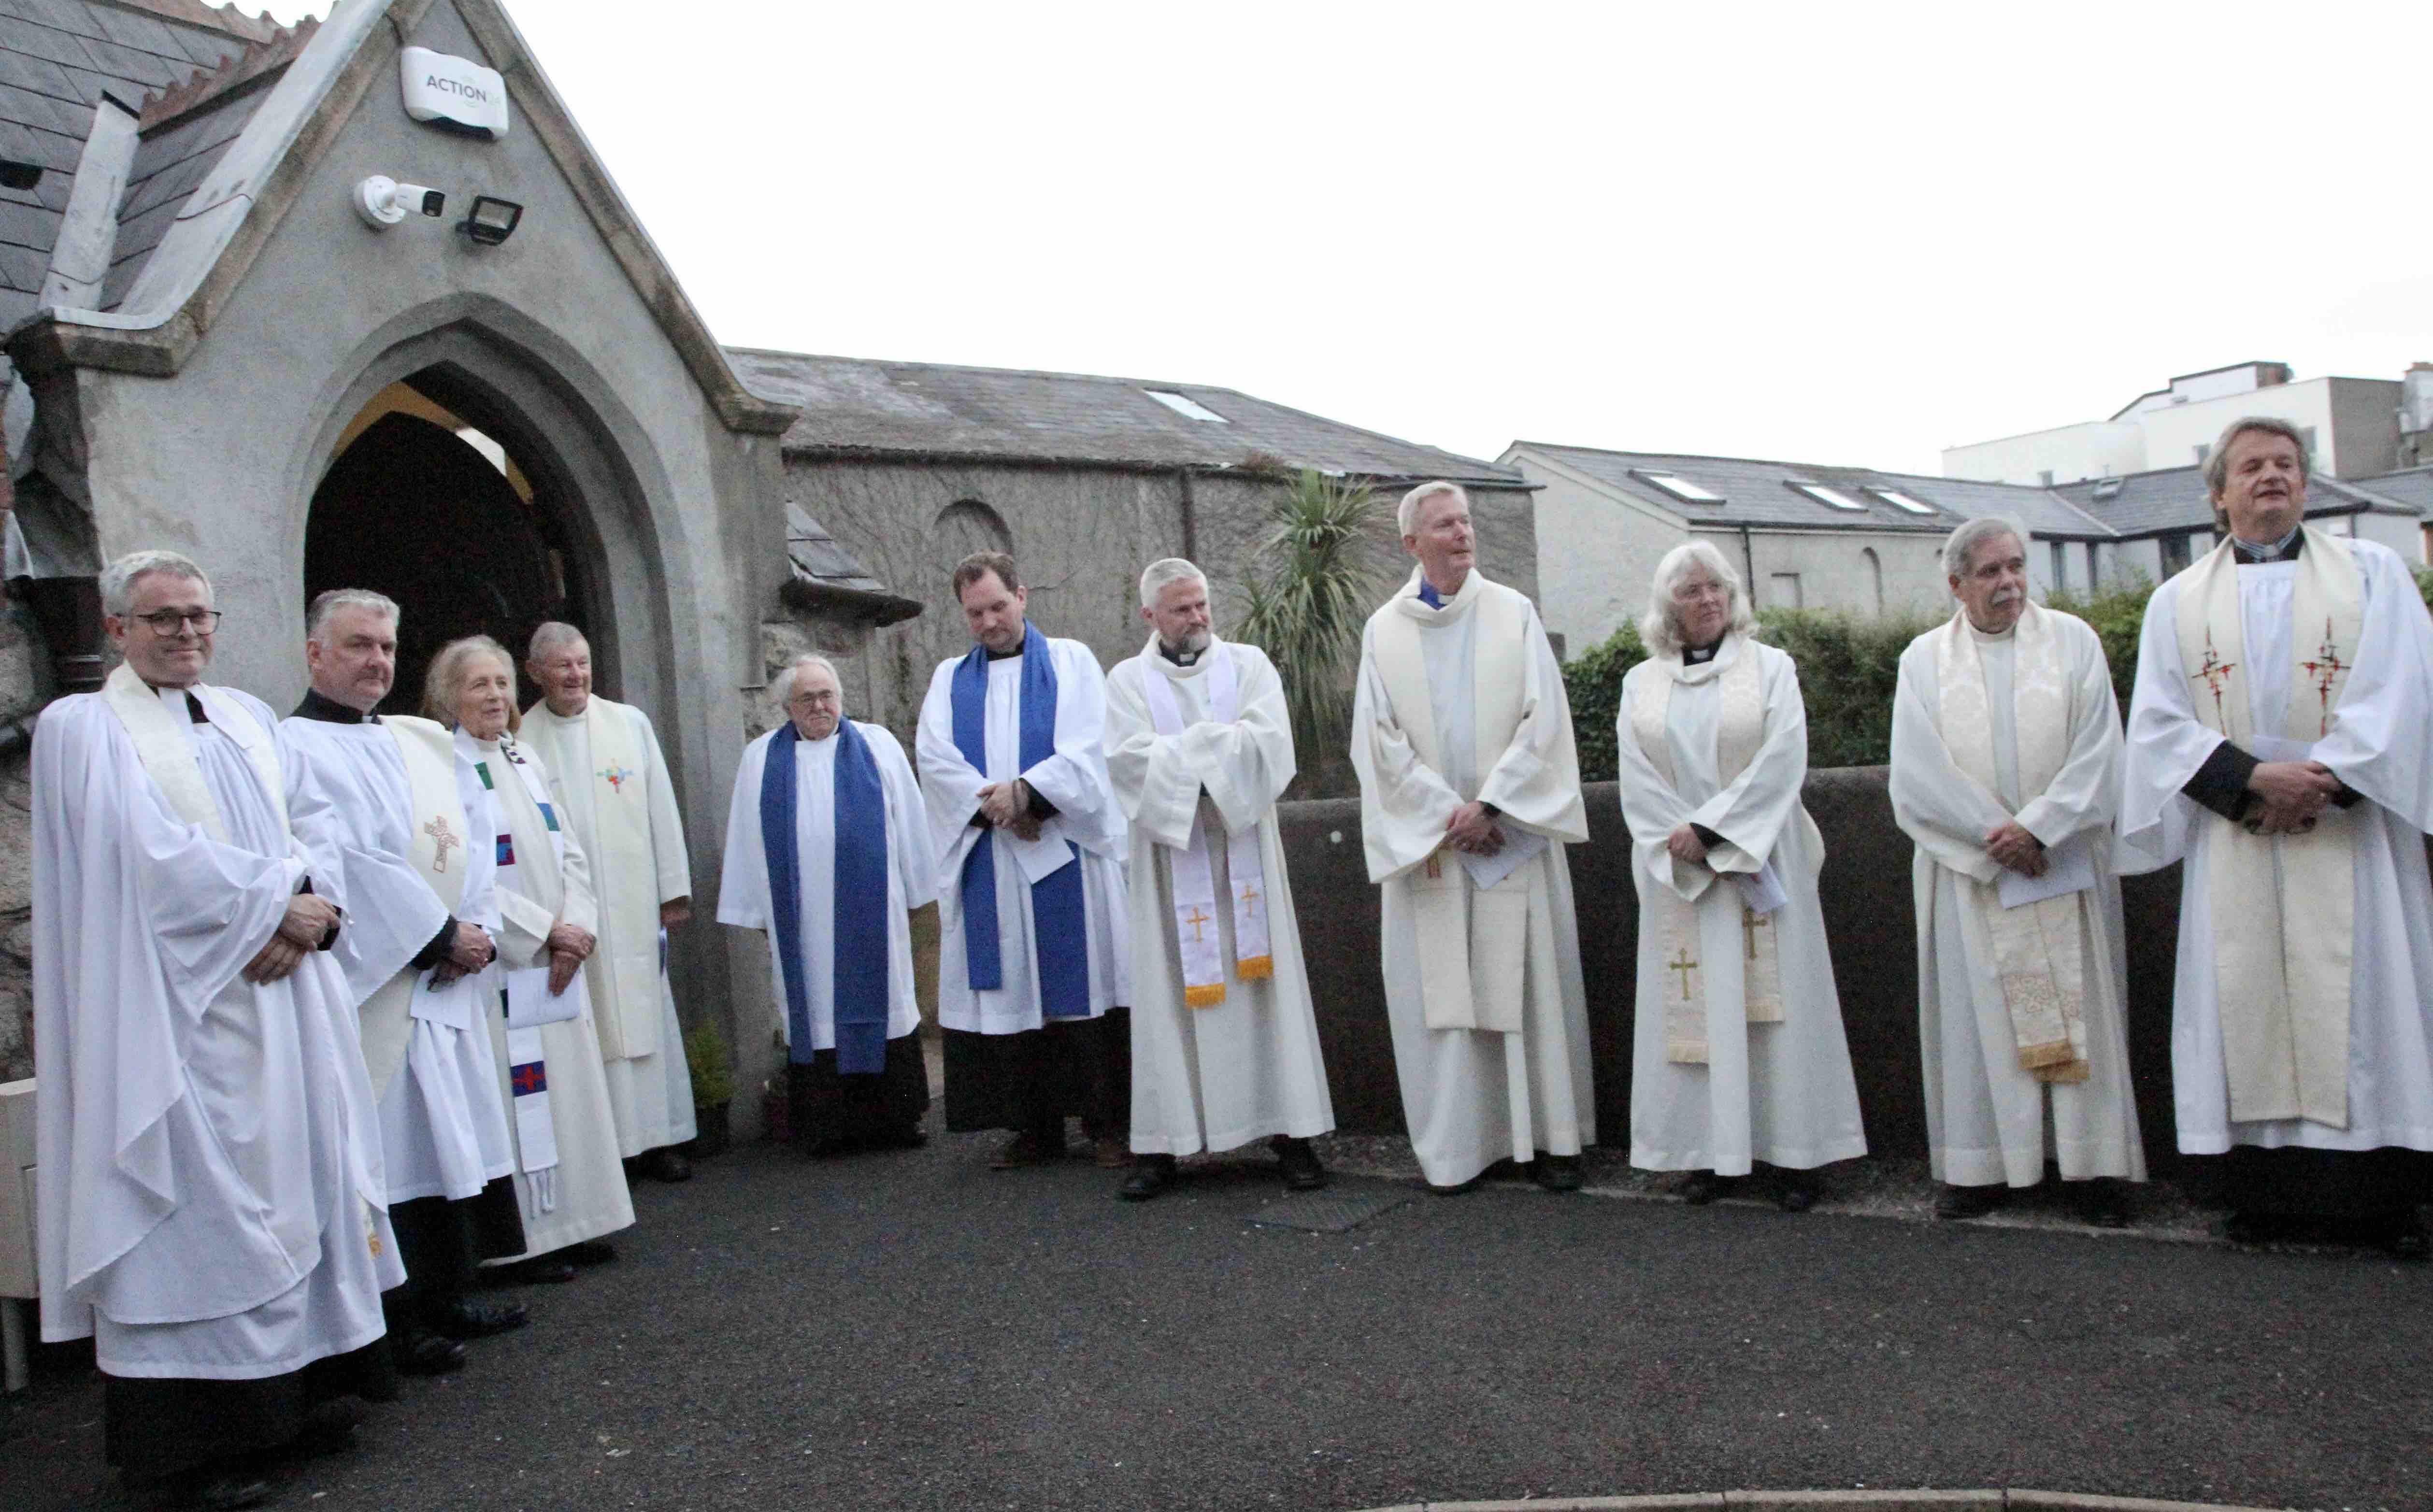 Some of the clergy in Christ Church Dun Laoghaire for the introduction of the Revd Steve Brunn.